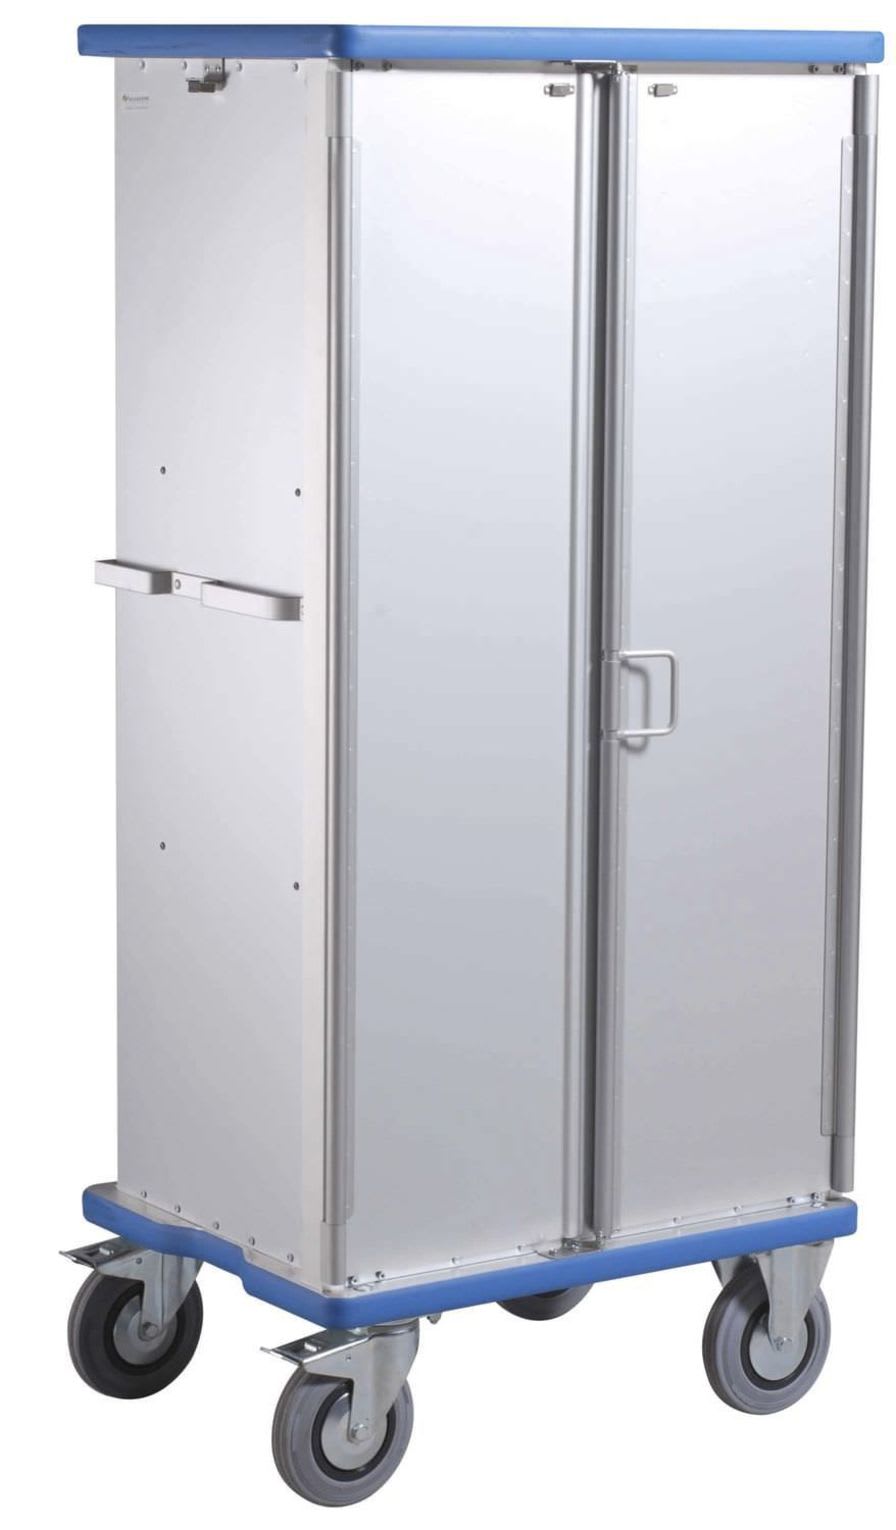 Medical cabinet / clean linen / for healthcare facilities / 2-door E2725 Sclessin Productions